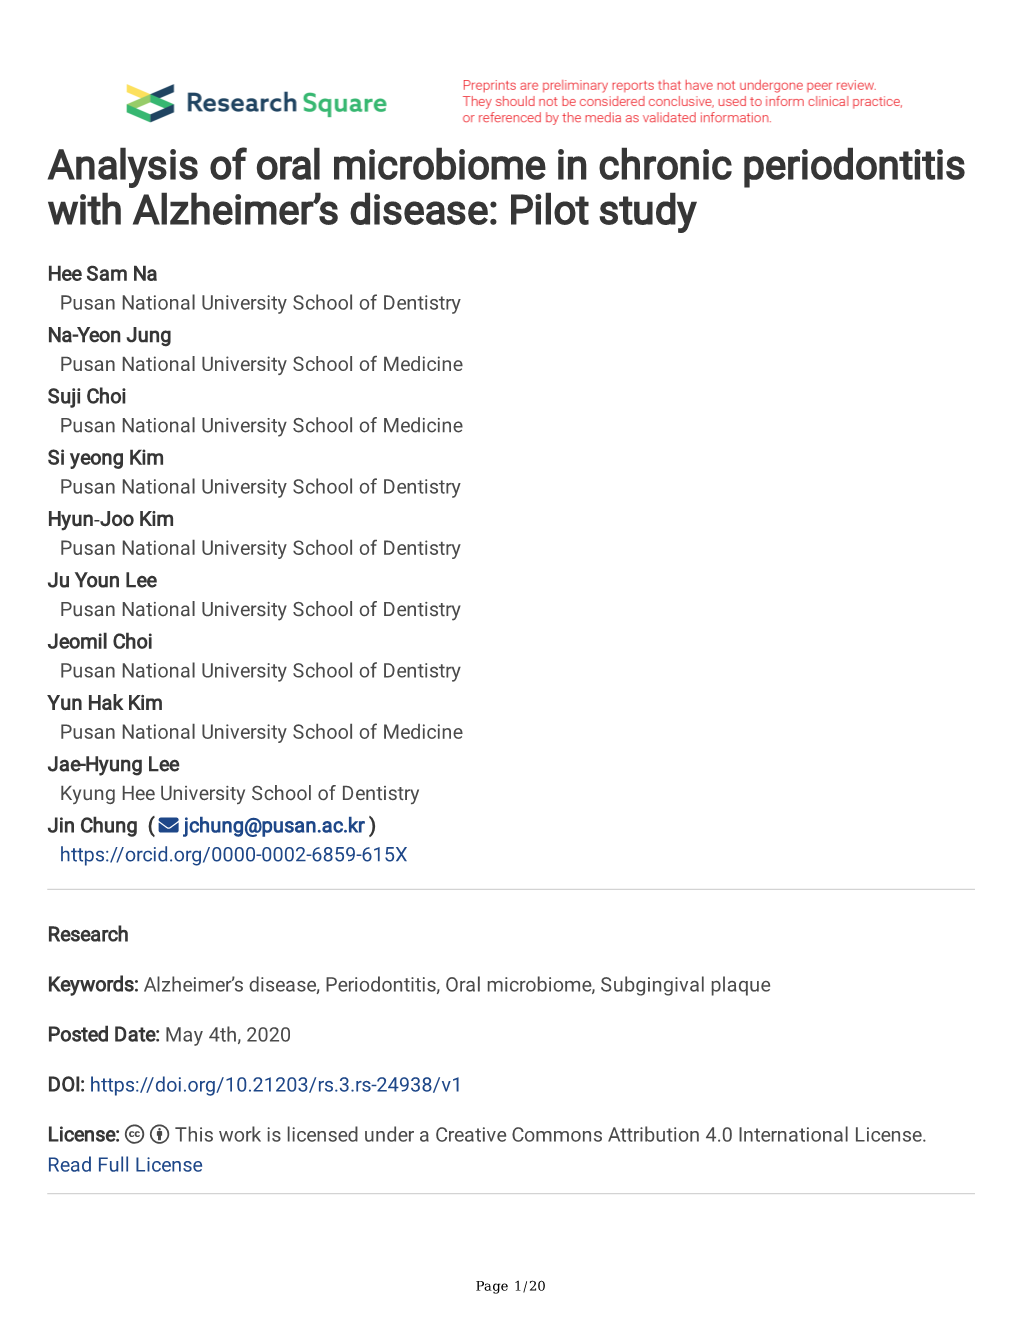 Analysis of Oral Microbiome in Chronic Periodontitis with Alzheimer's Disease